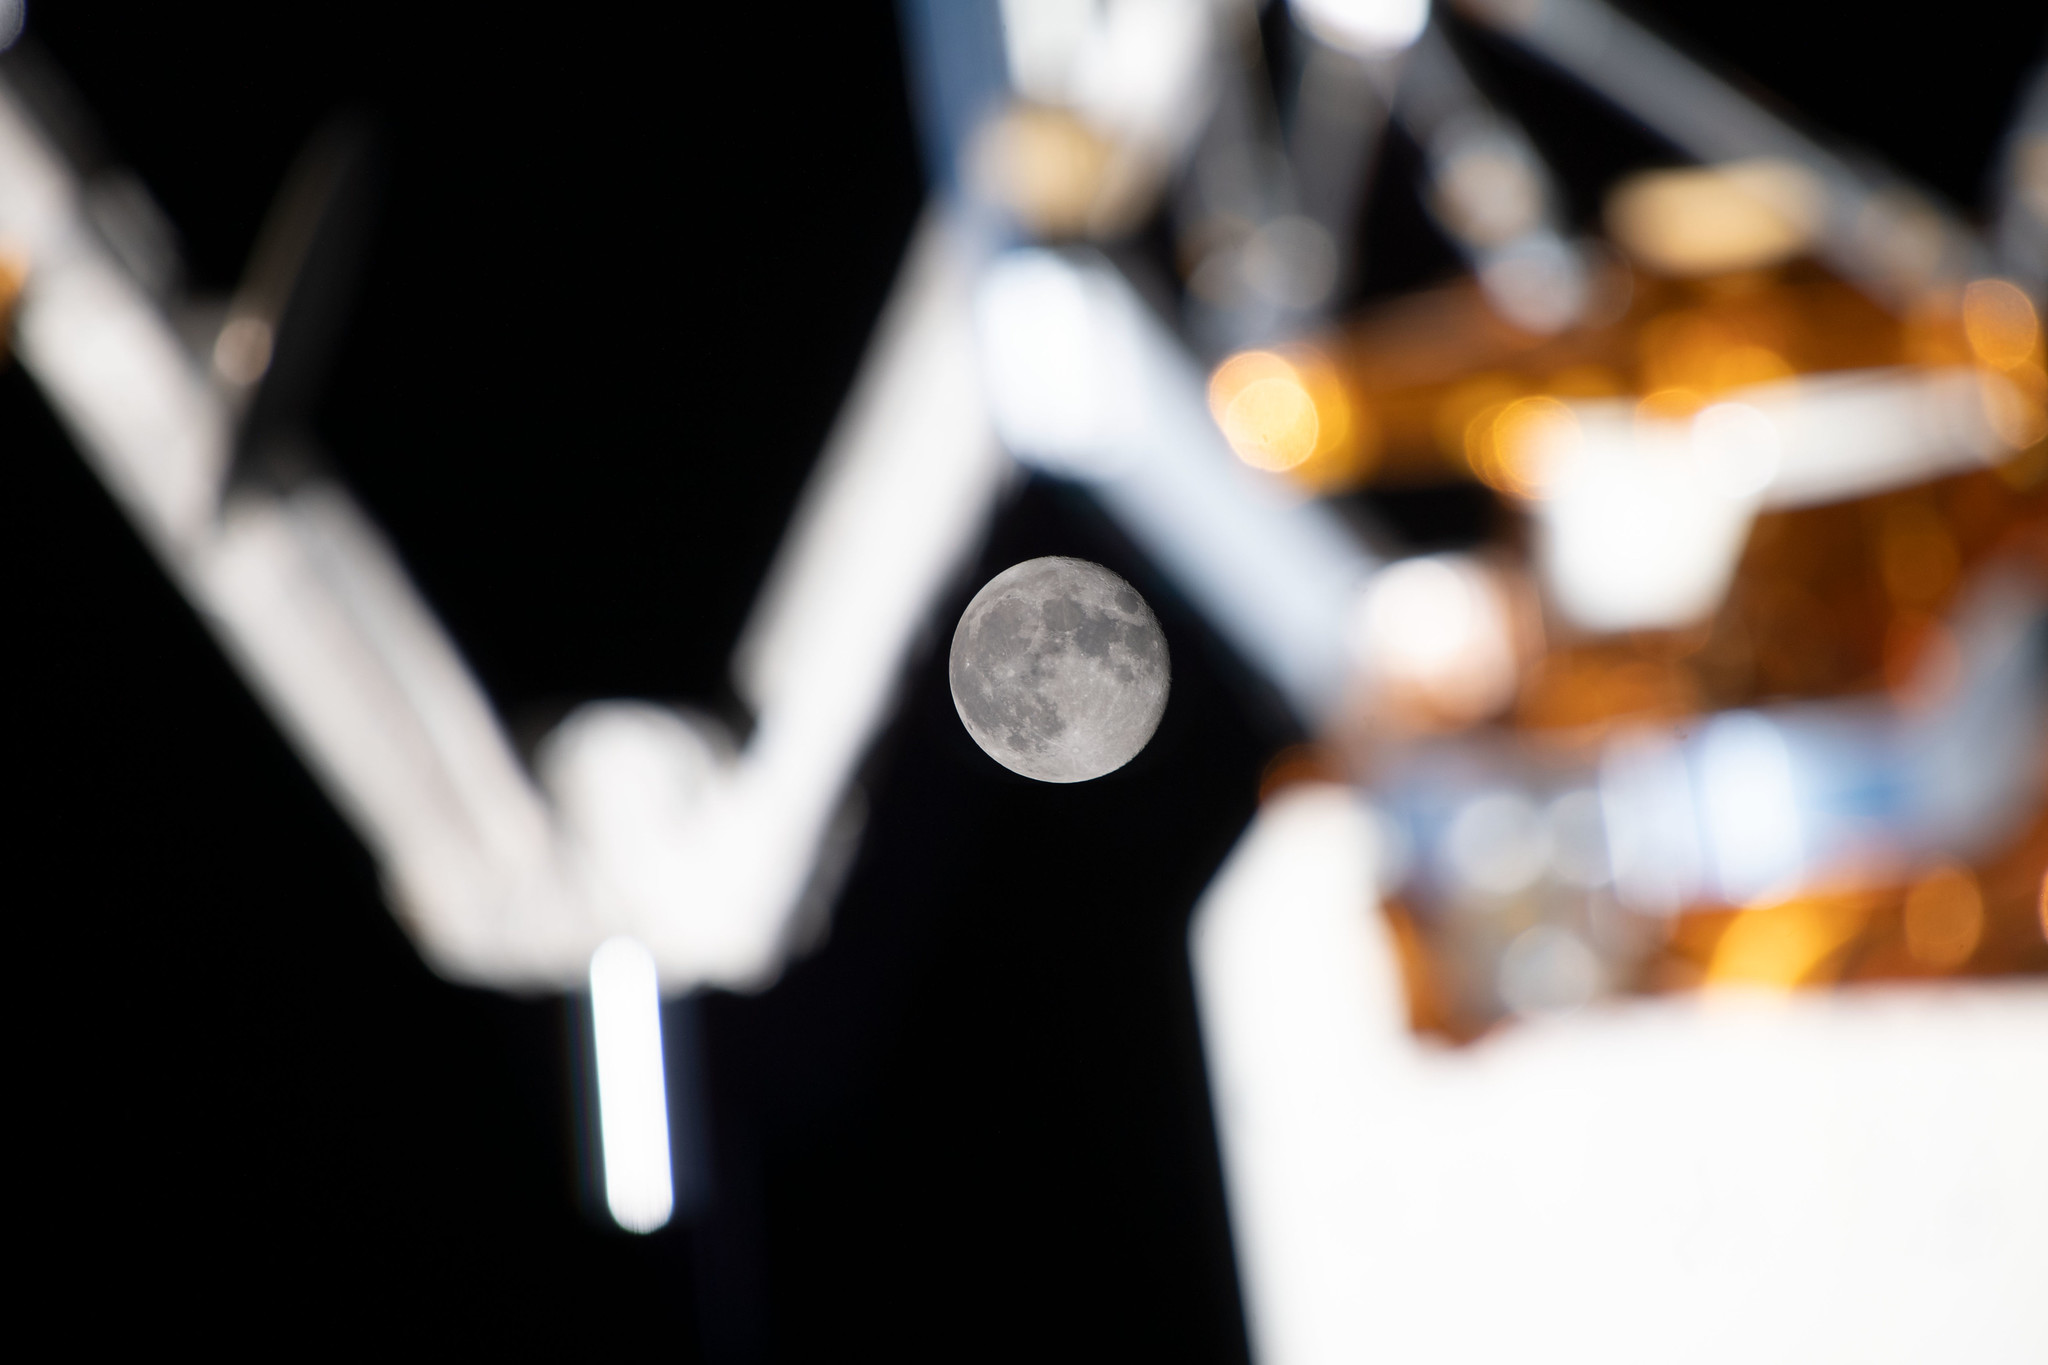 September's full Moon, the Harvest Moon, is photographed from the International Space Station, perfectly placed in between exterior station hardware.